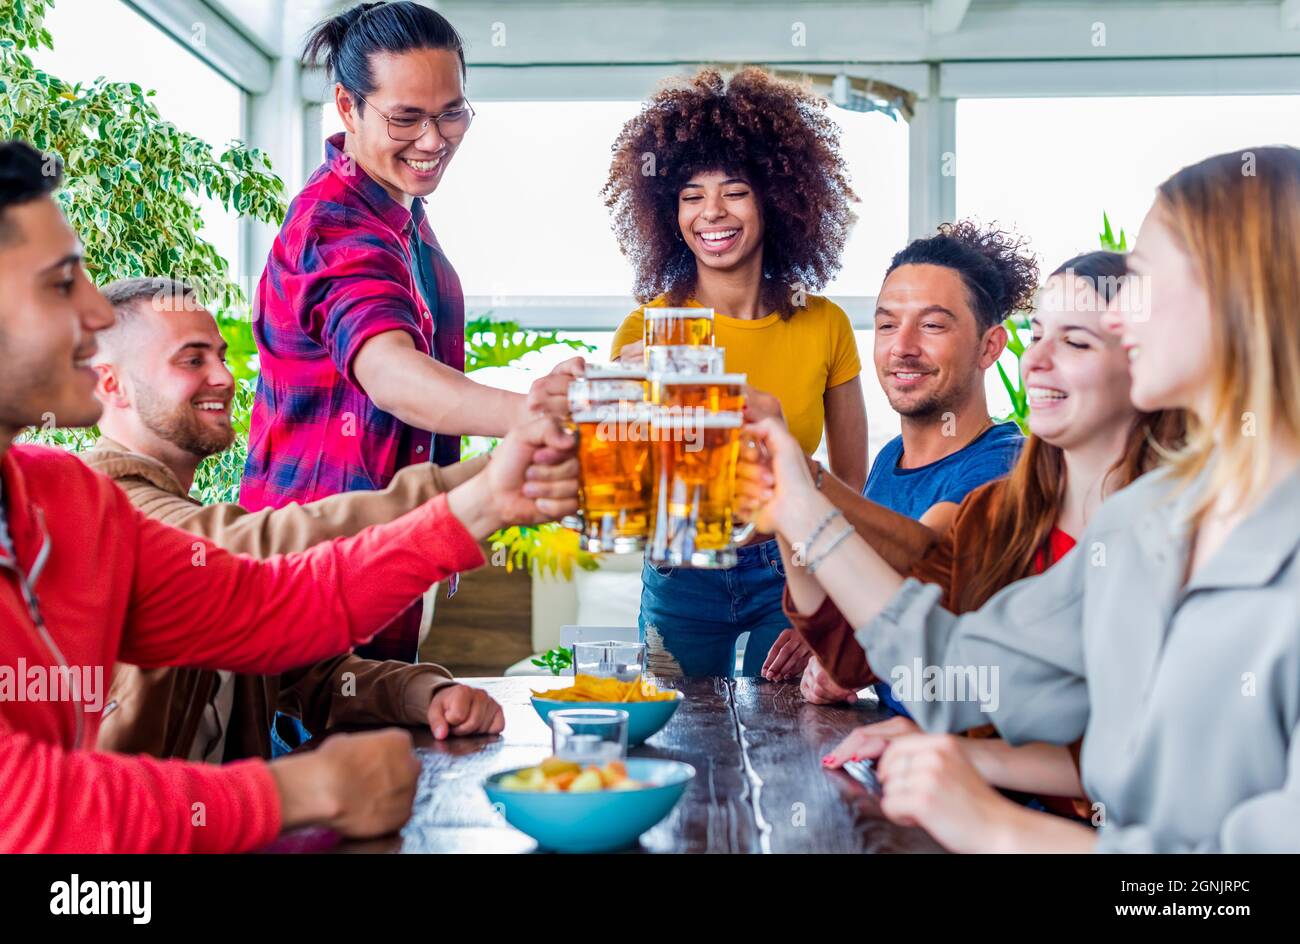 happy group of diverse friends celebrating together on a table in a bar restaurant indoors making celebratoty toast with beers during happy hour Stock Photo